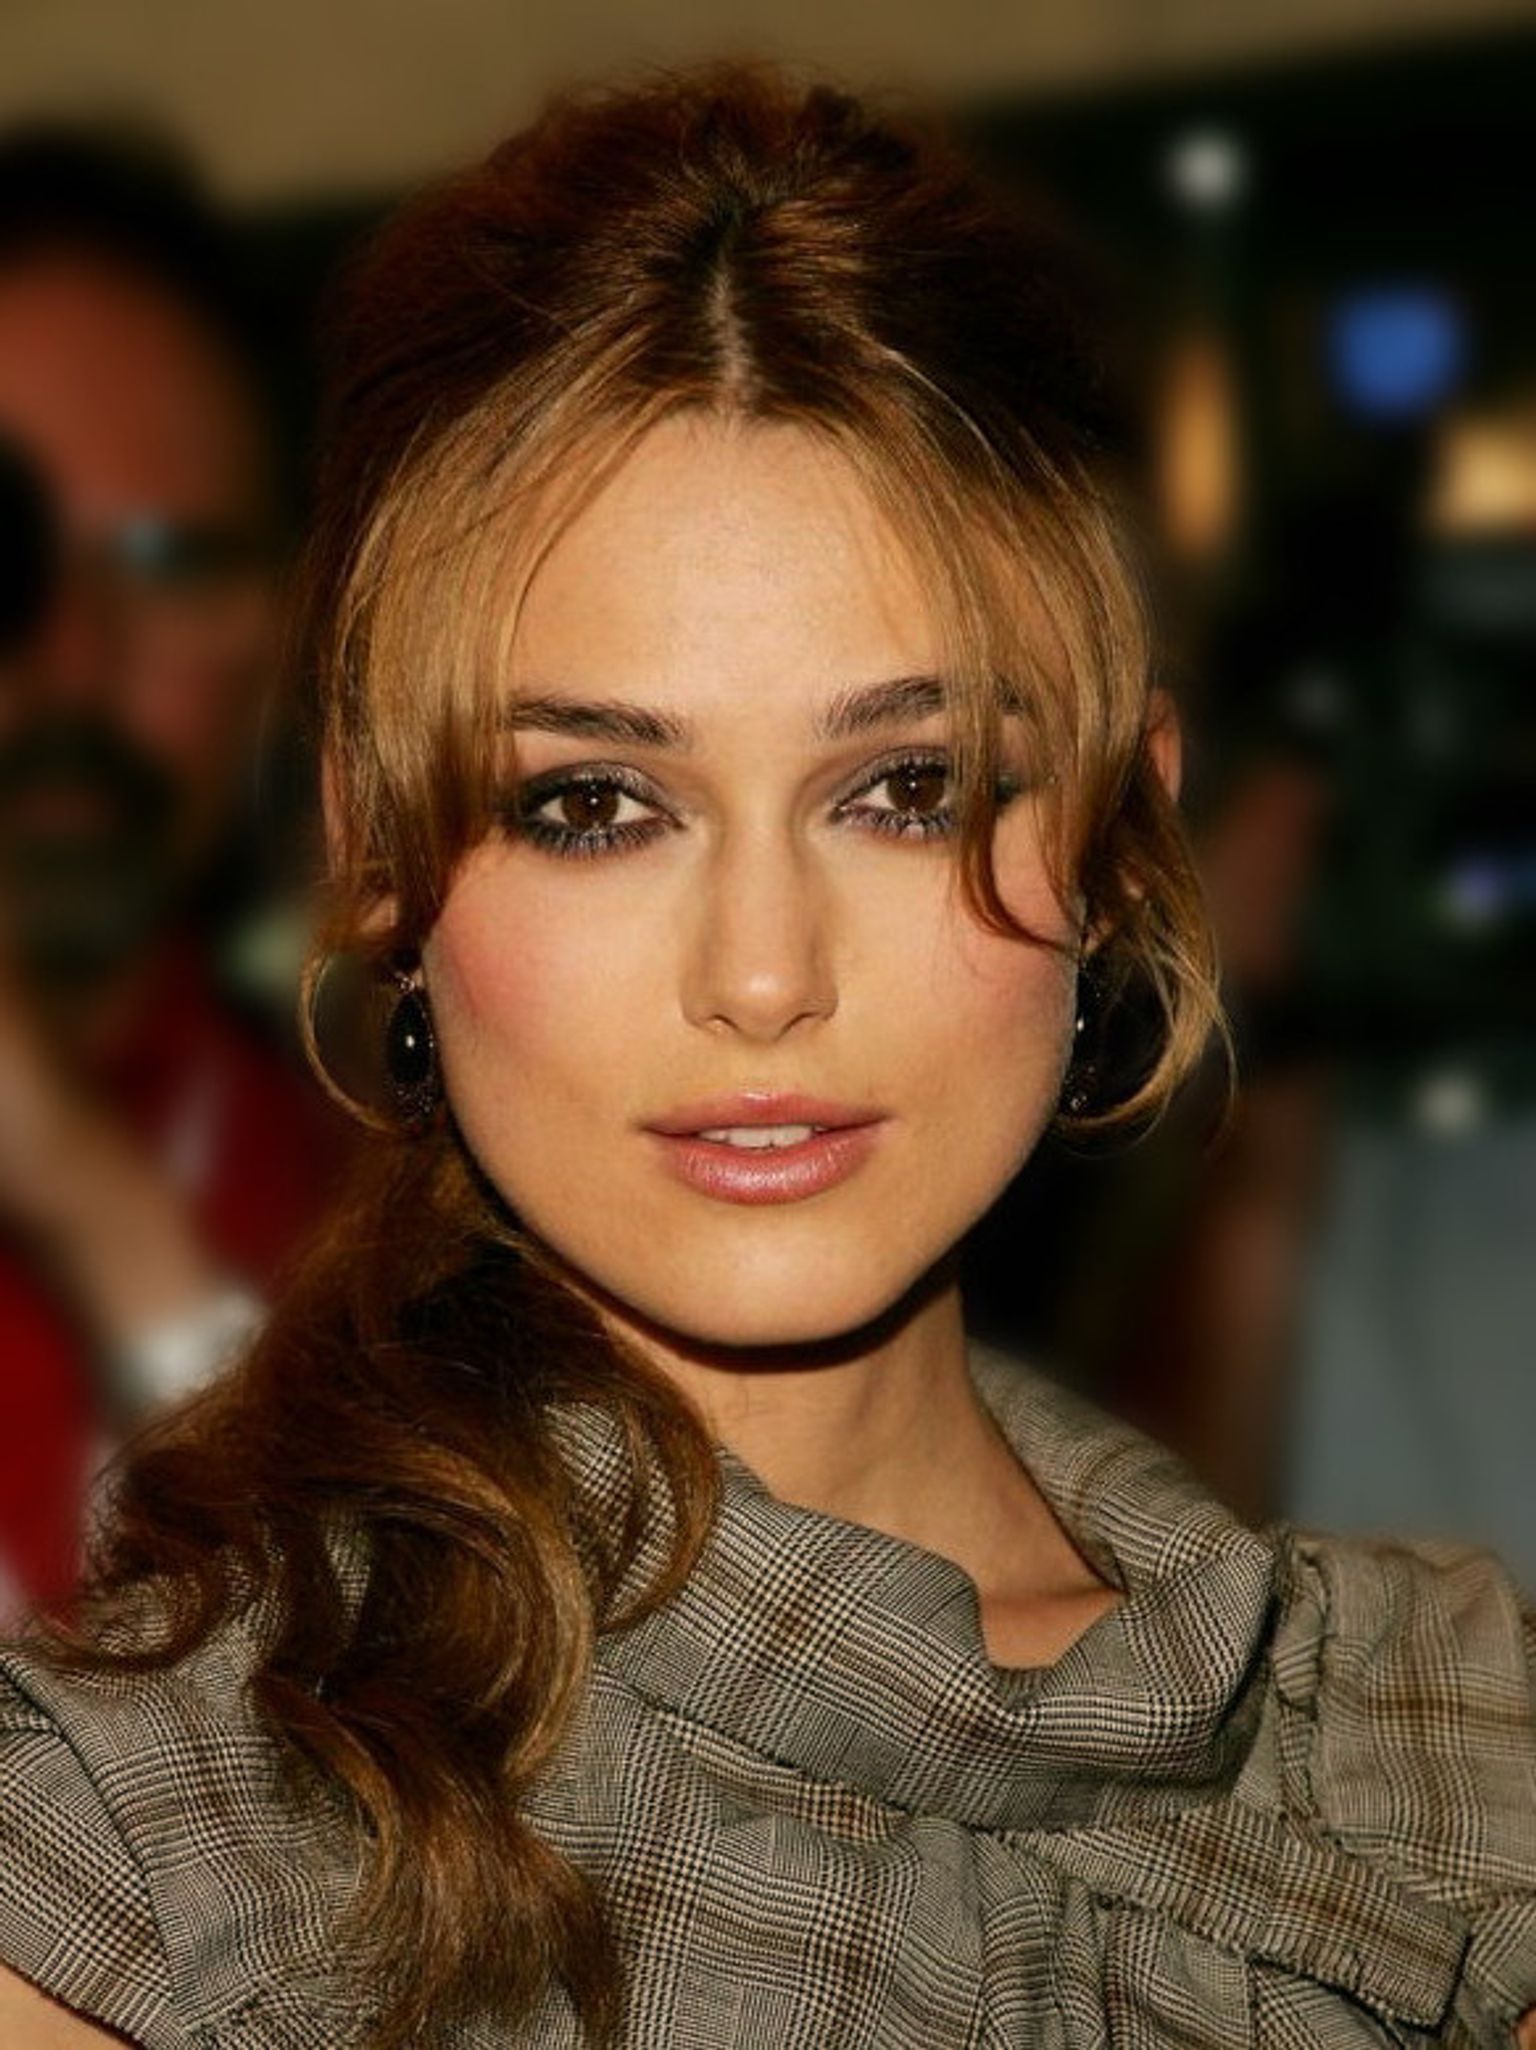 Is Keira Knightley the classic English rose?